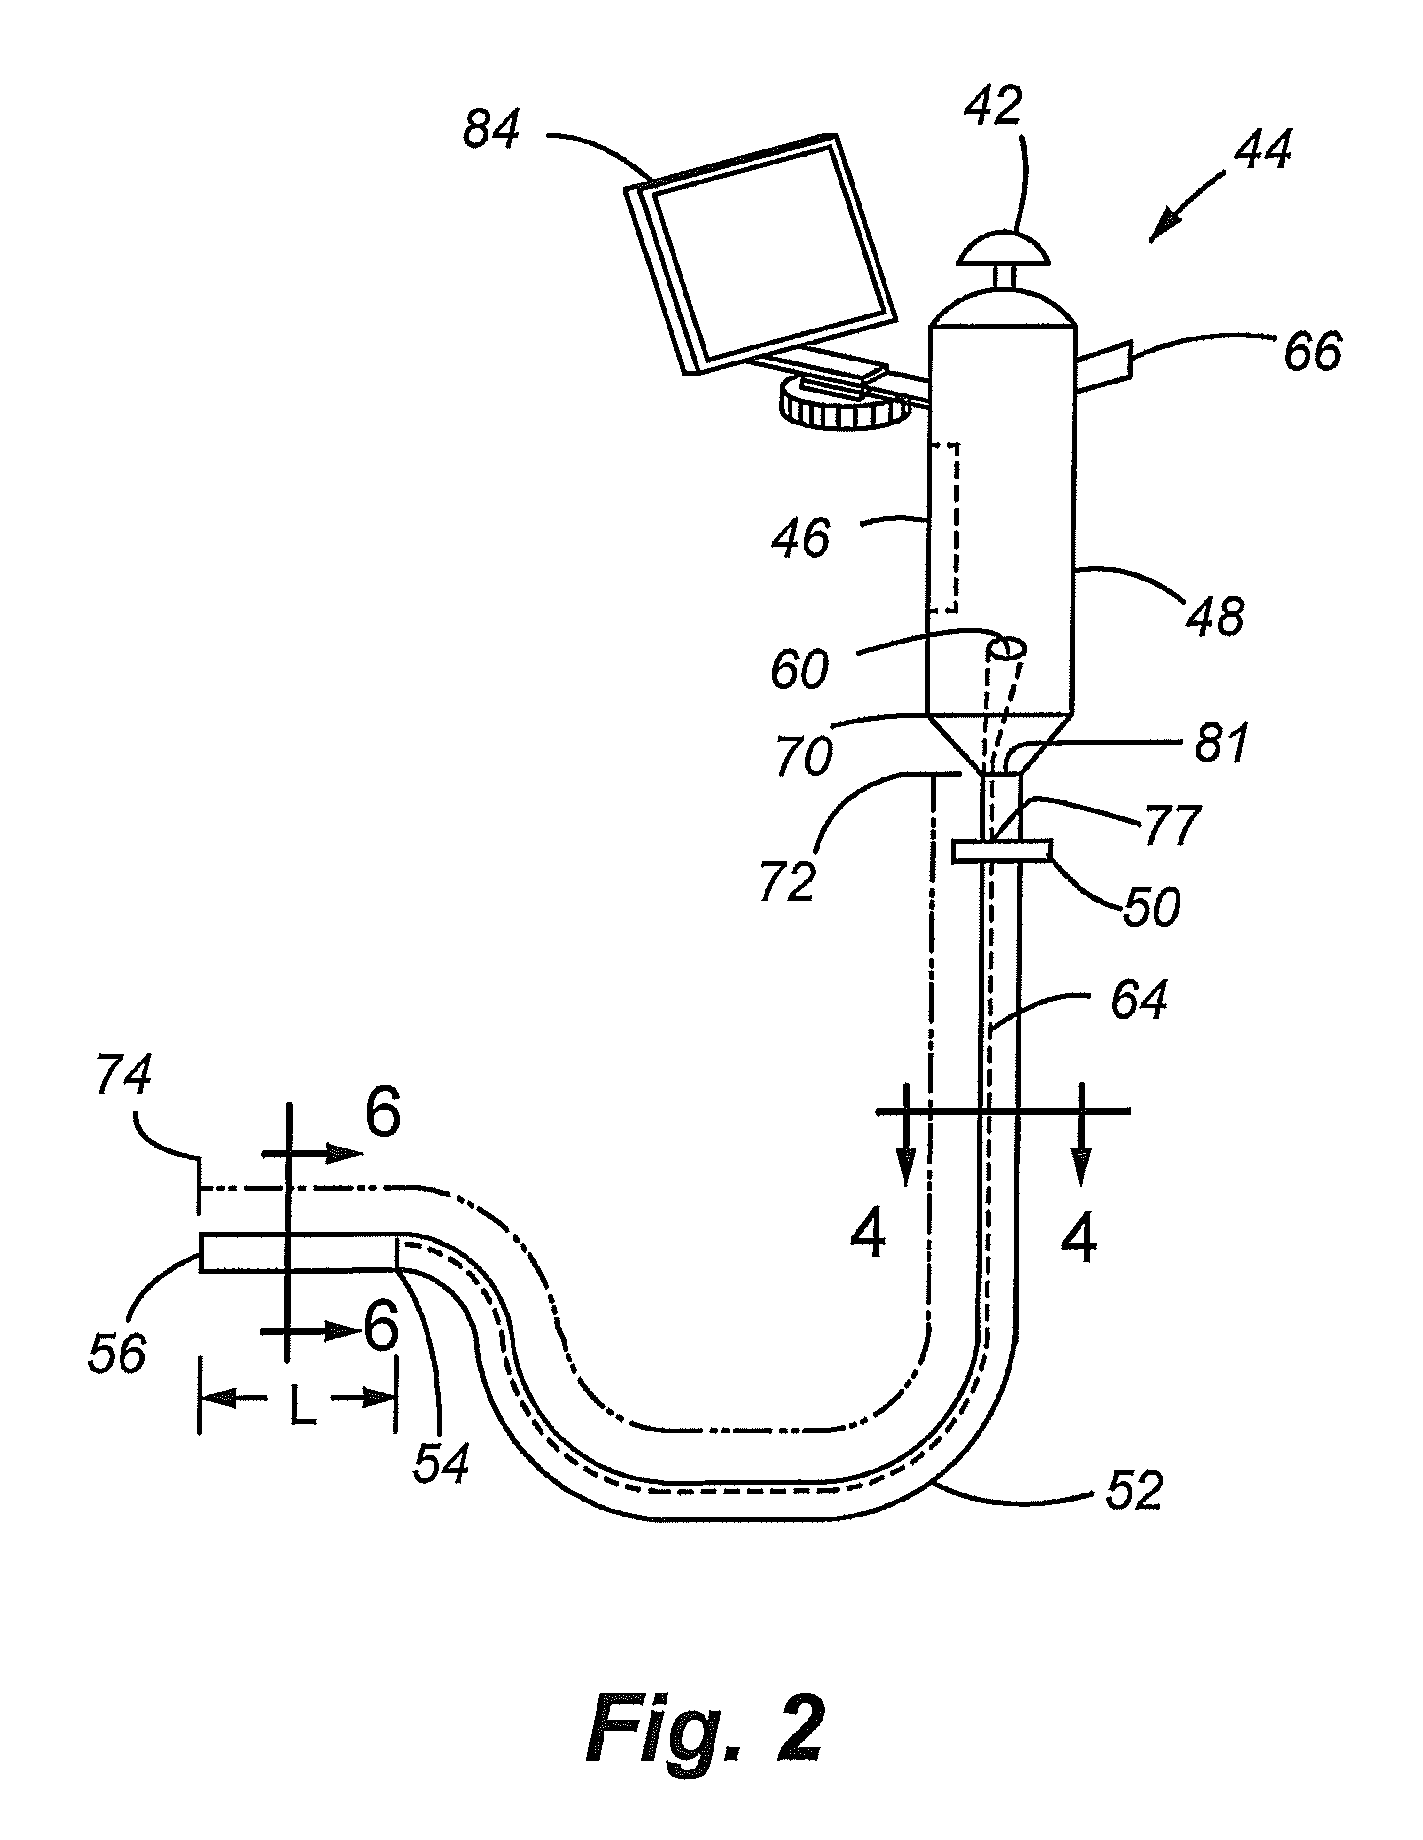 Modifications in endoscope apparatus, using fluid and gas dynamics, and methods for improving visibility during endoscopy